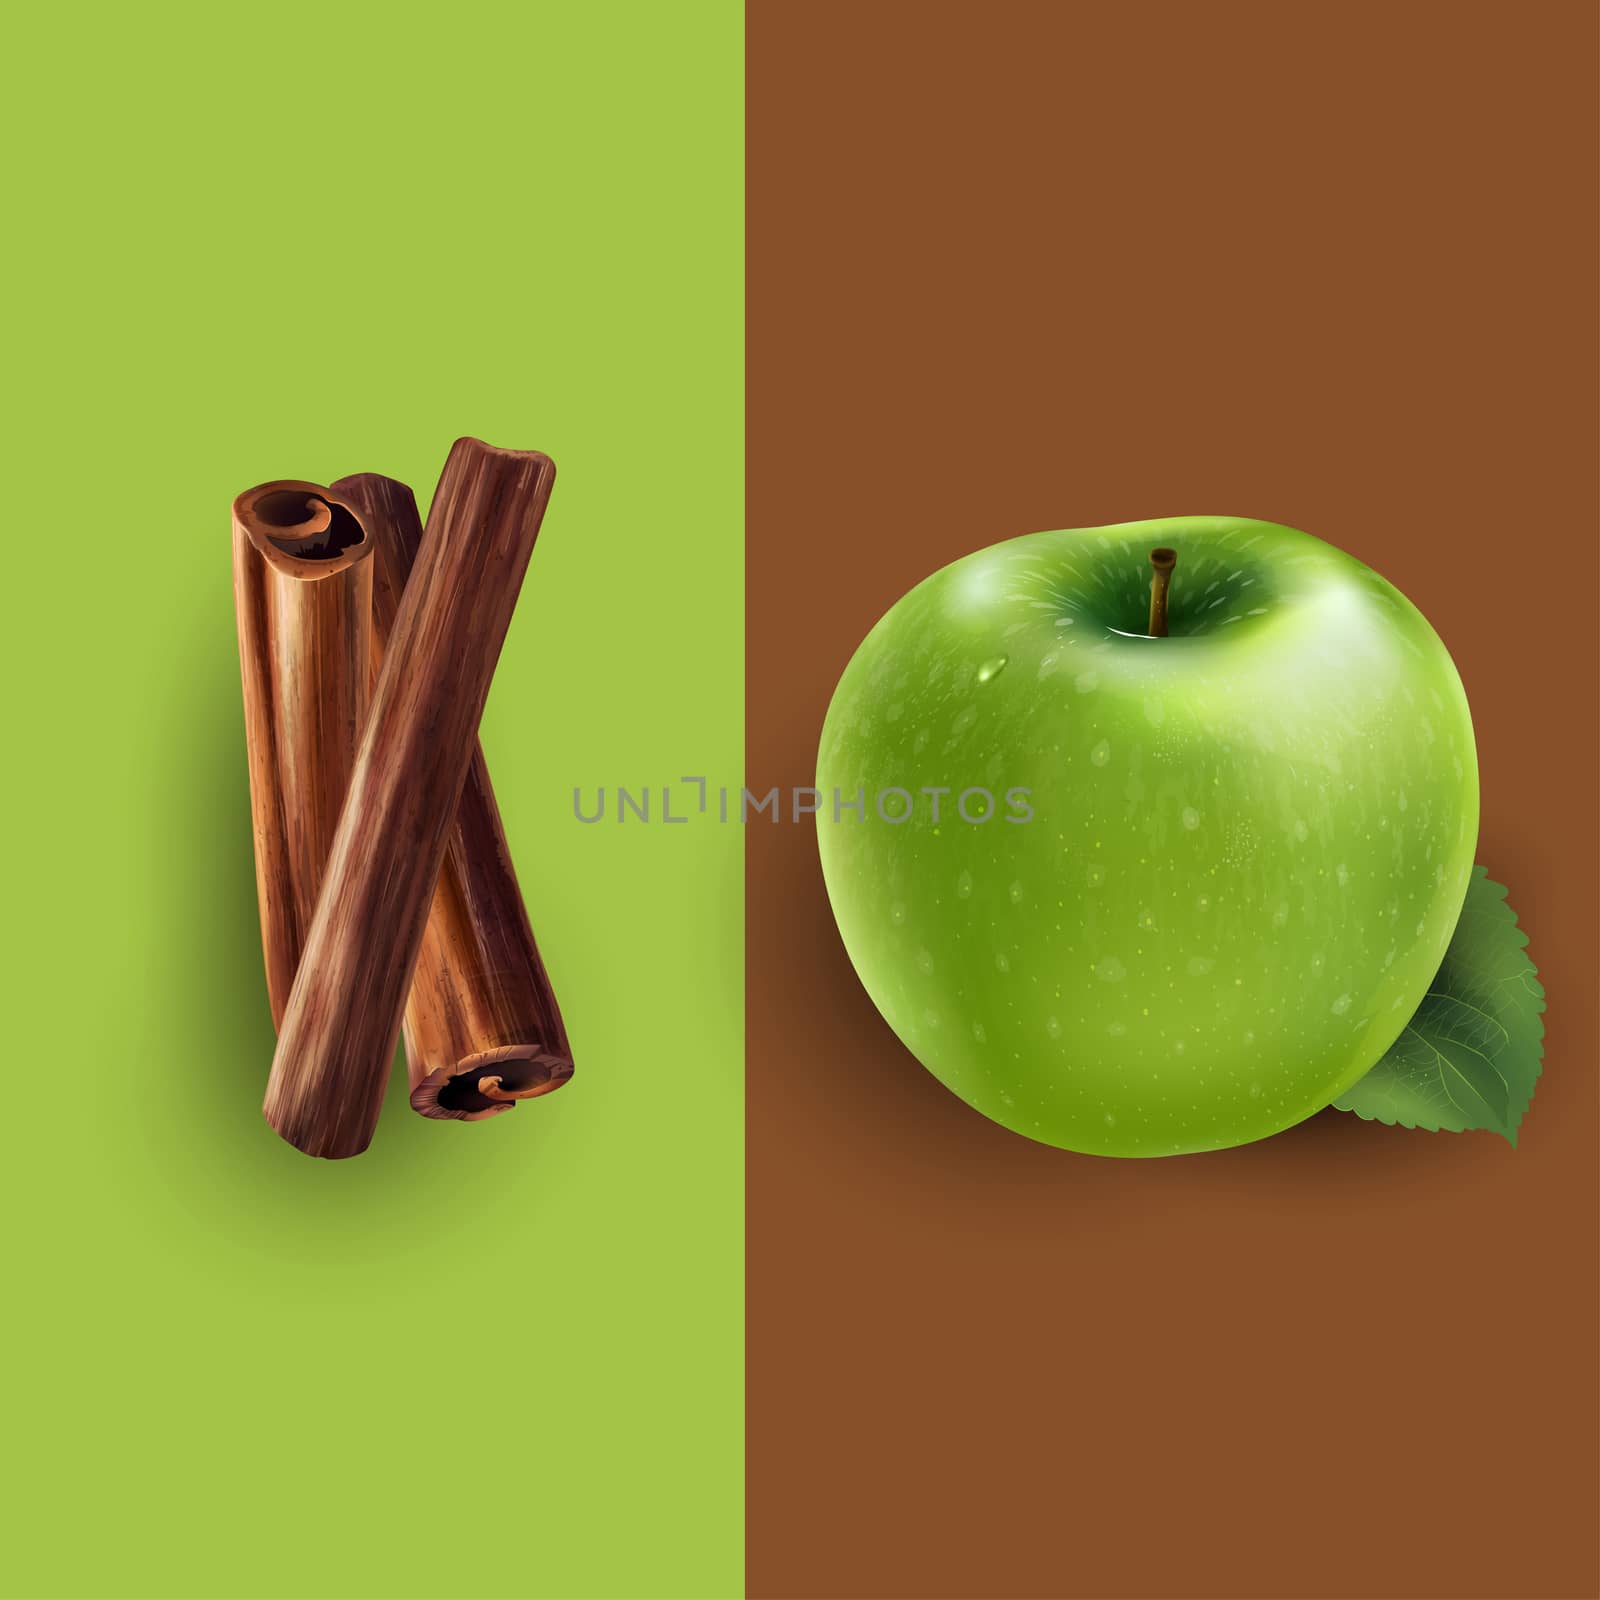 Cinnamon and green apple illustration by ConceptCafe